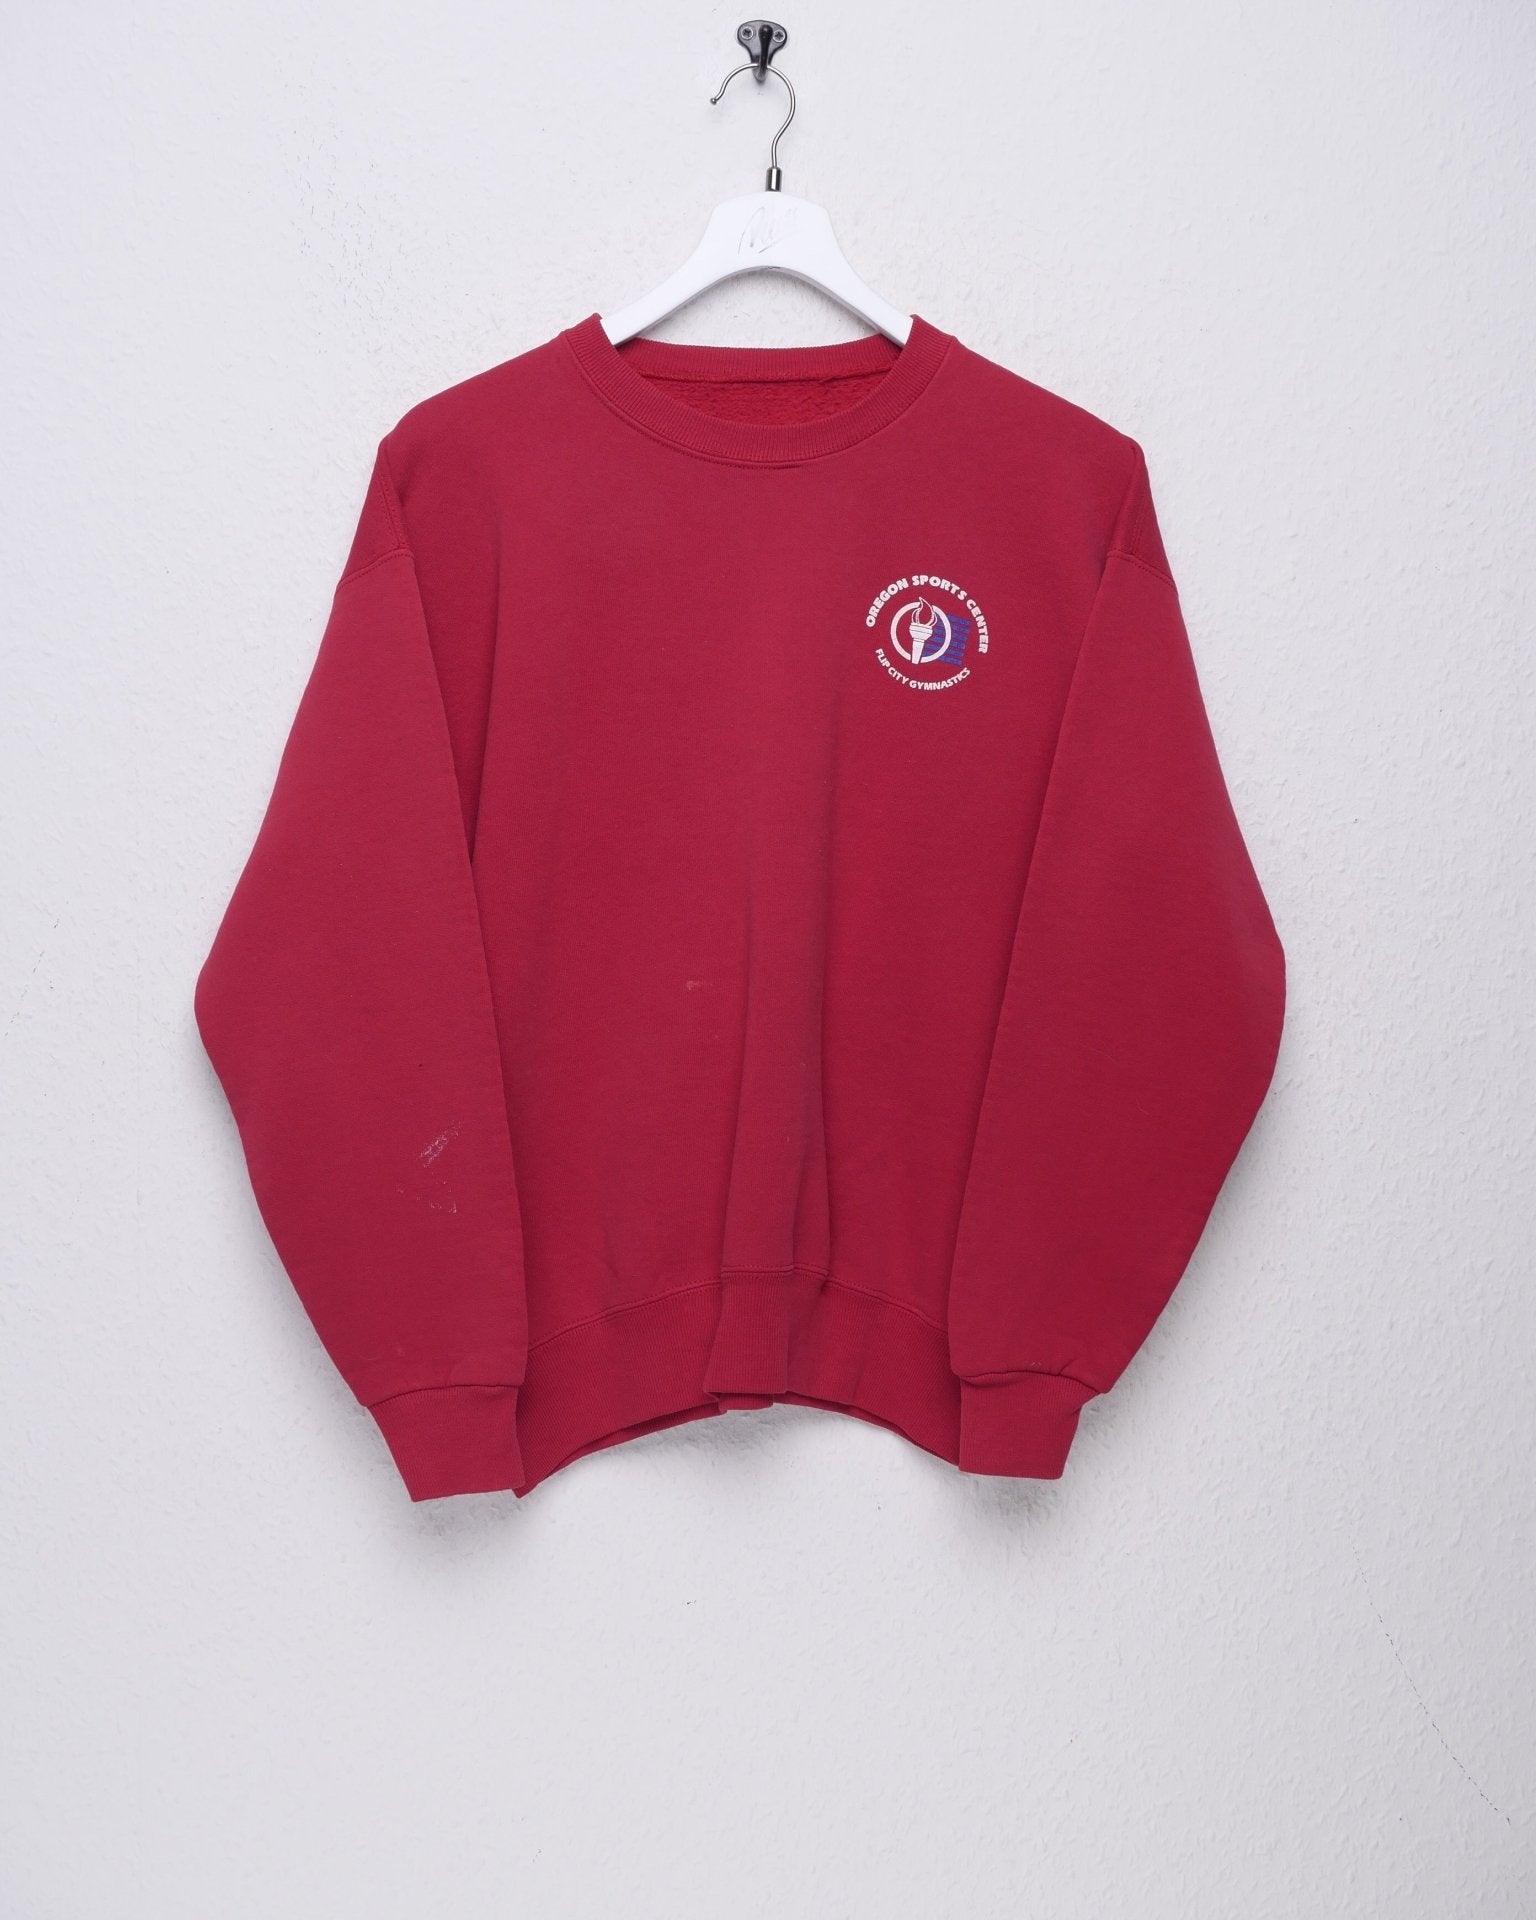 Printed 'Oregon Sports Center' Logo red Sweater - Peeces